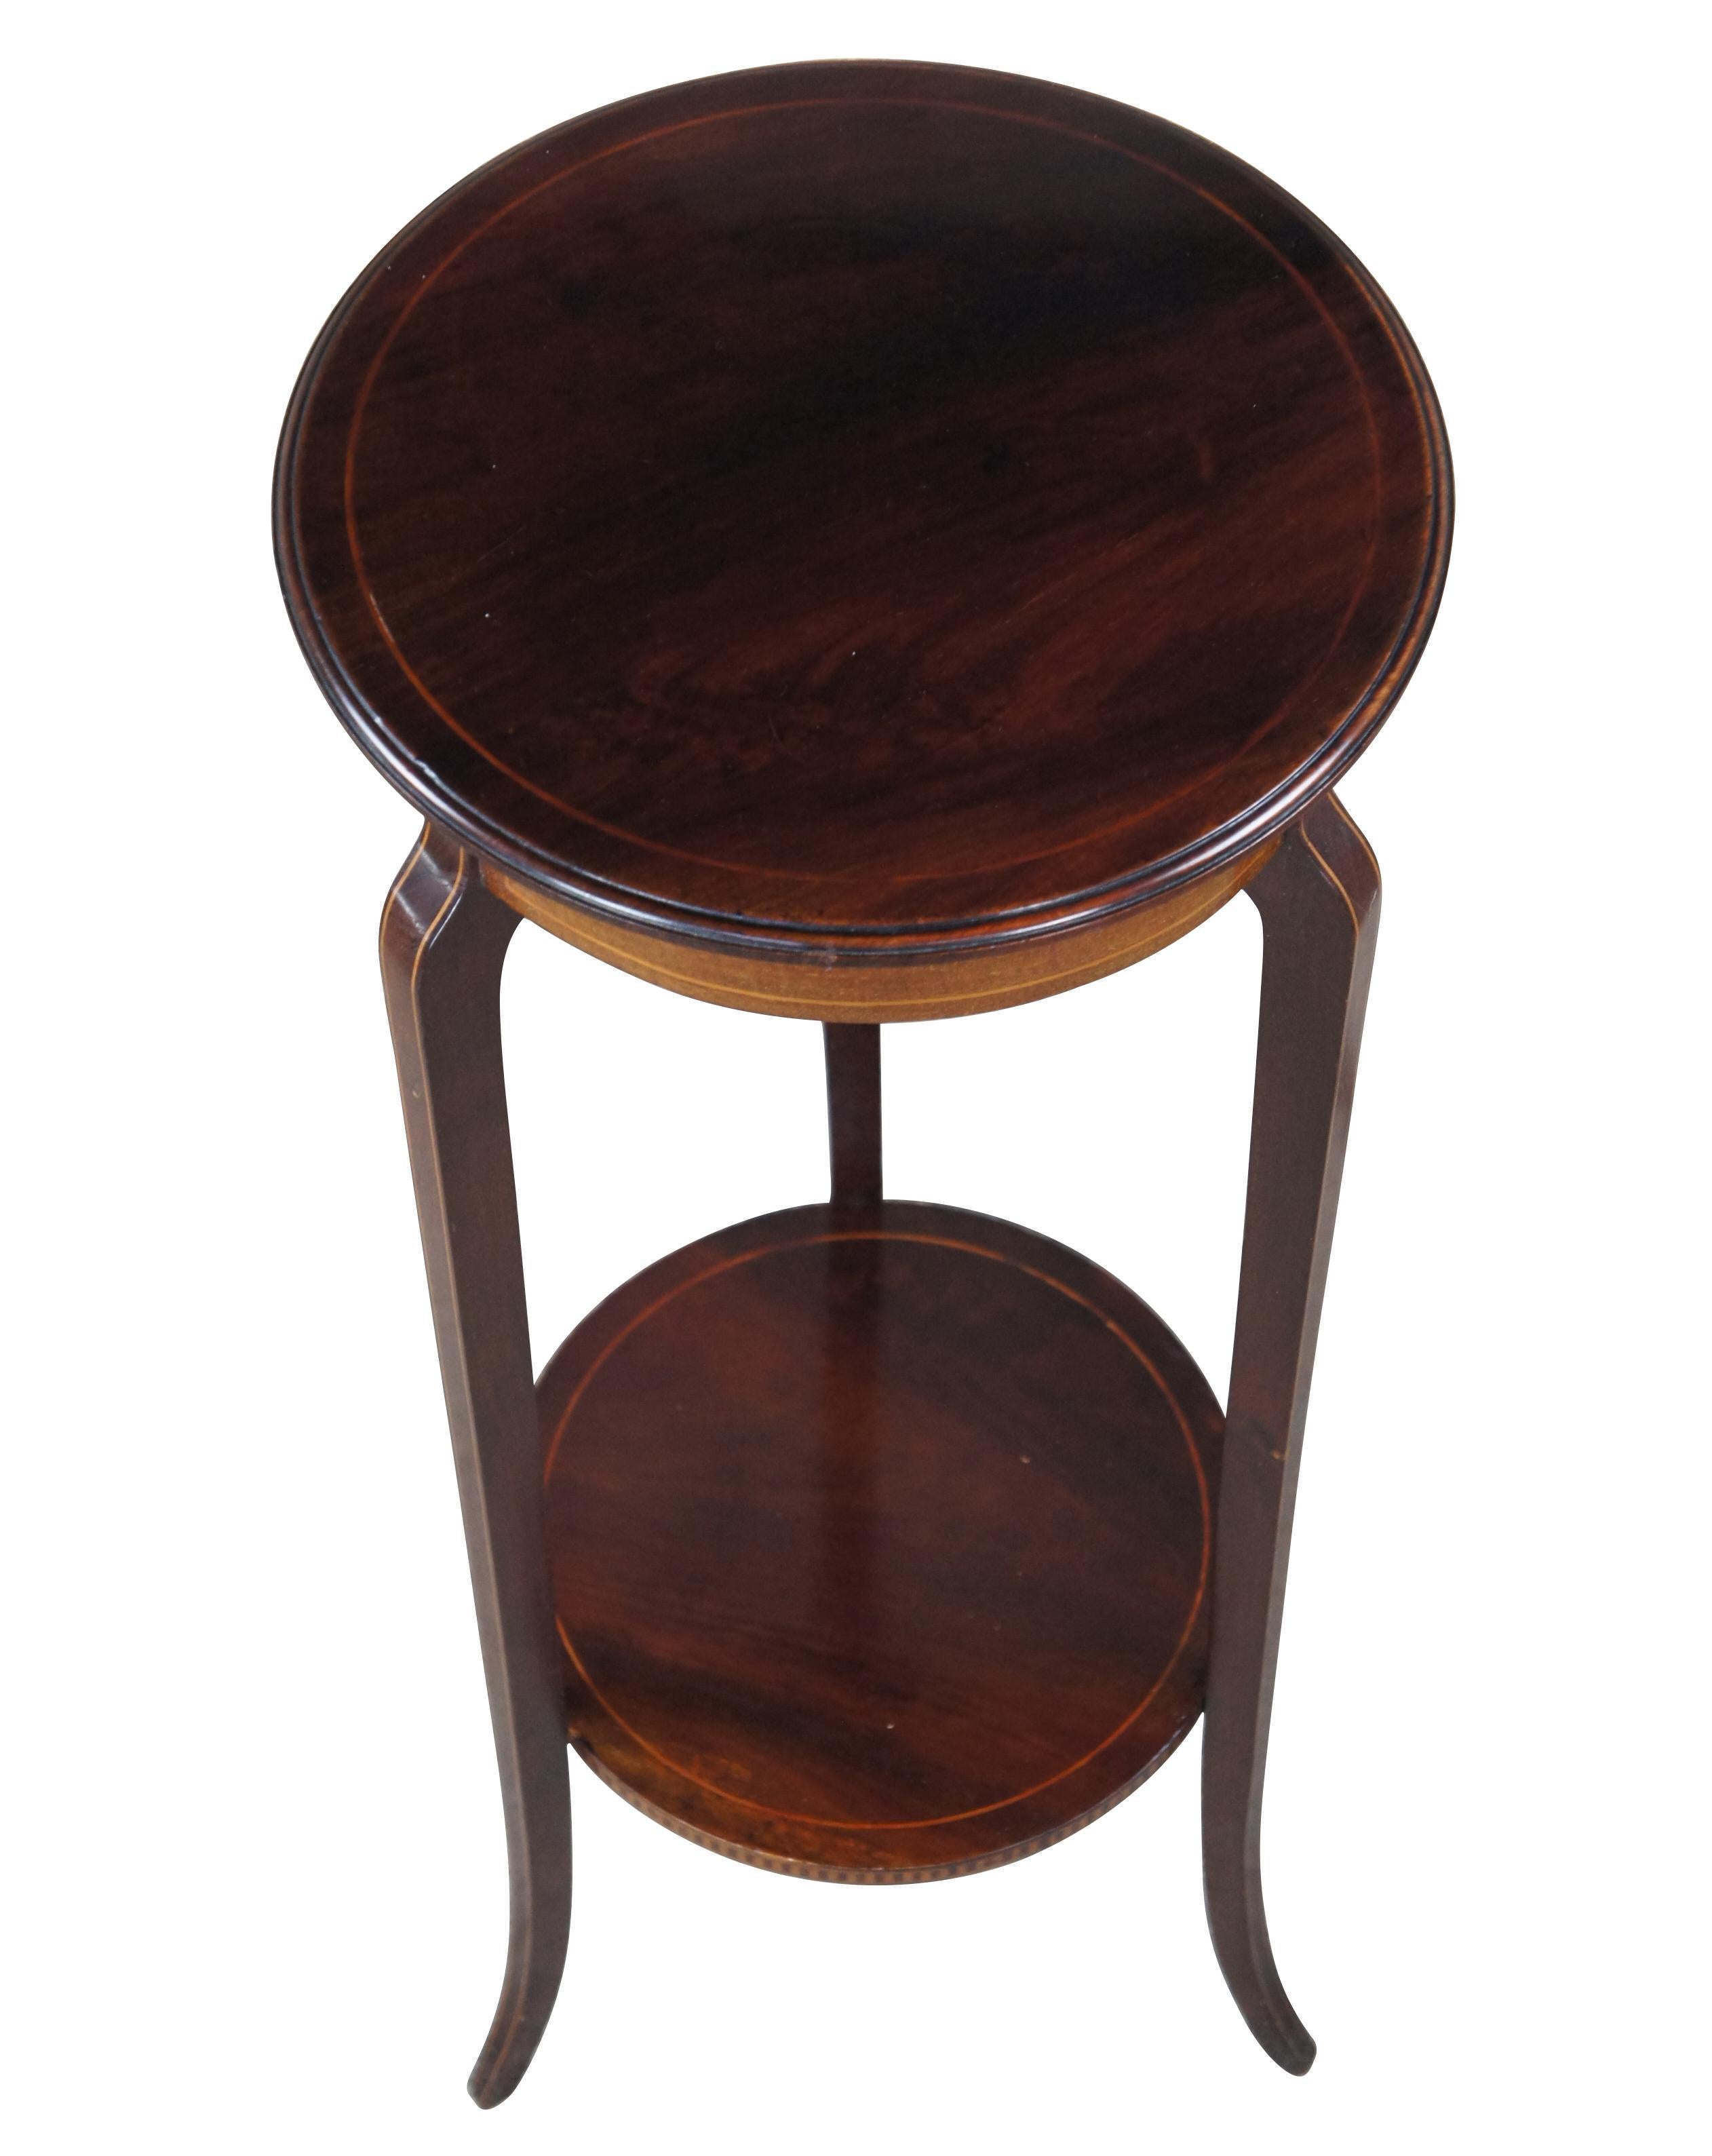 Antique Edwardian Sheraton Mahogany Inlaid Plant Stand Sculpture Pedestal Table In Good Condition For Sale In Dayton, OH